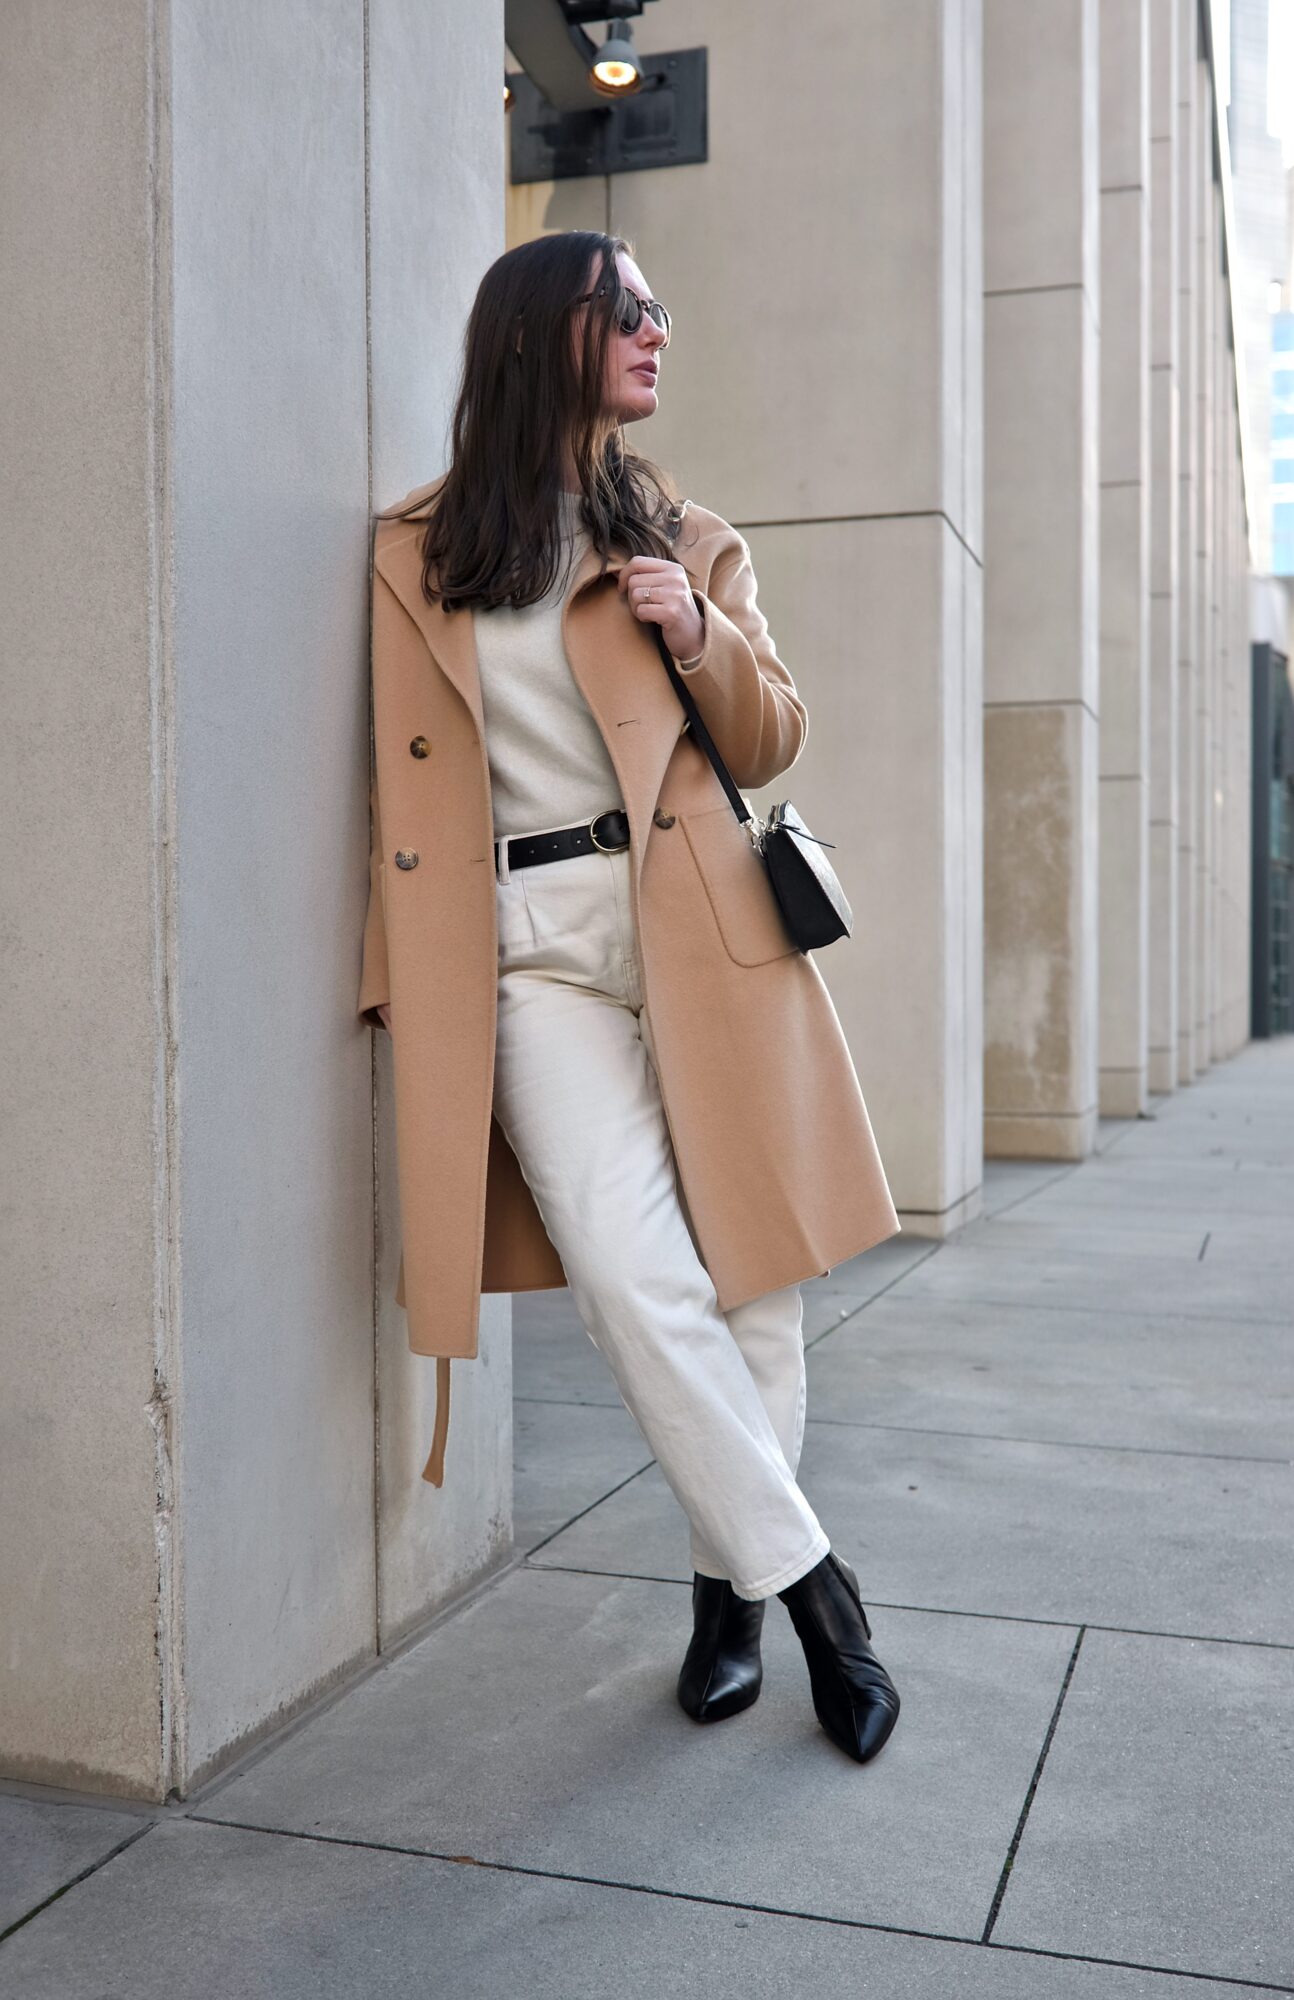 Alyssa wears all white with a camel coat and carries the Lo & Sons Waverley 2 bag